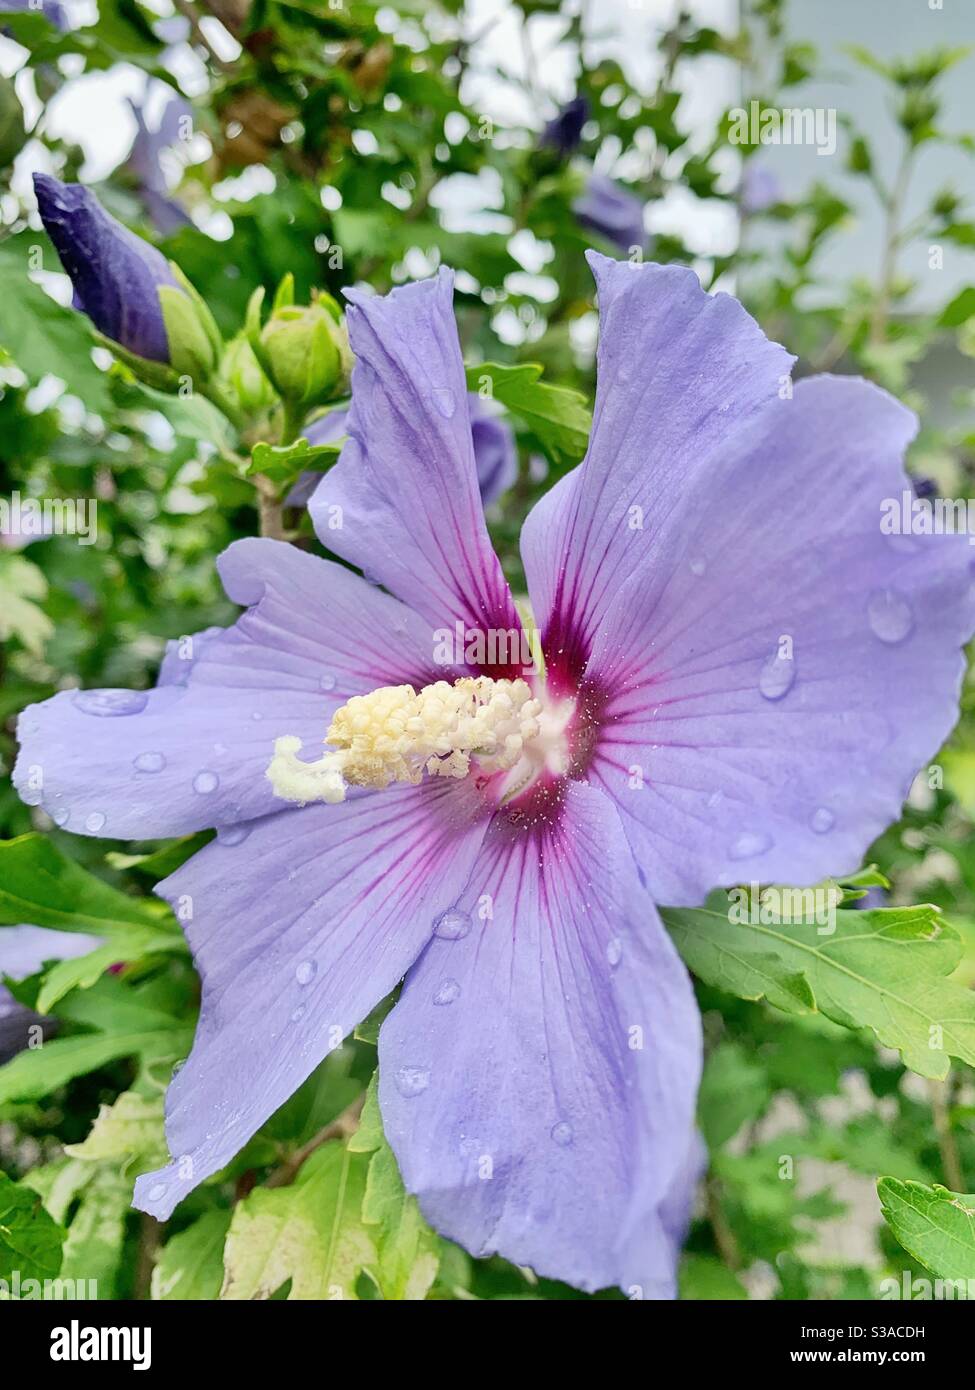 Violet hibiscus flower and bud Stock Photo